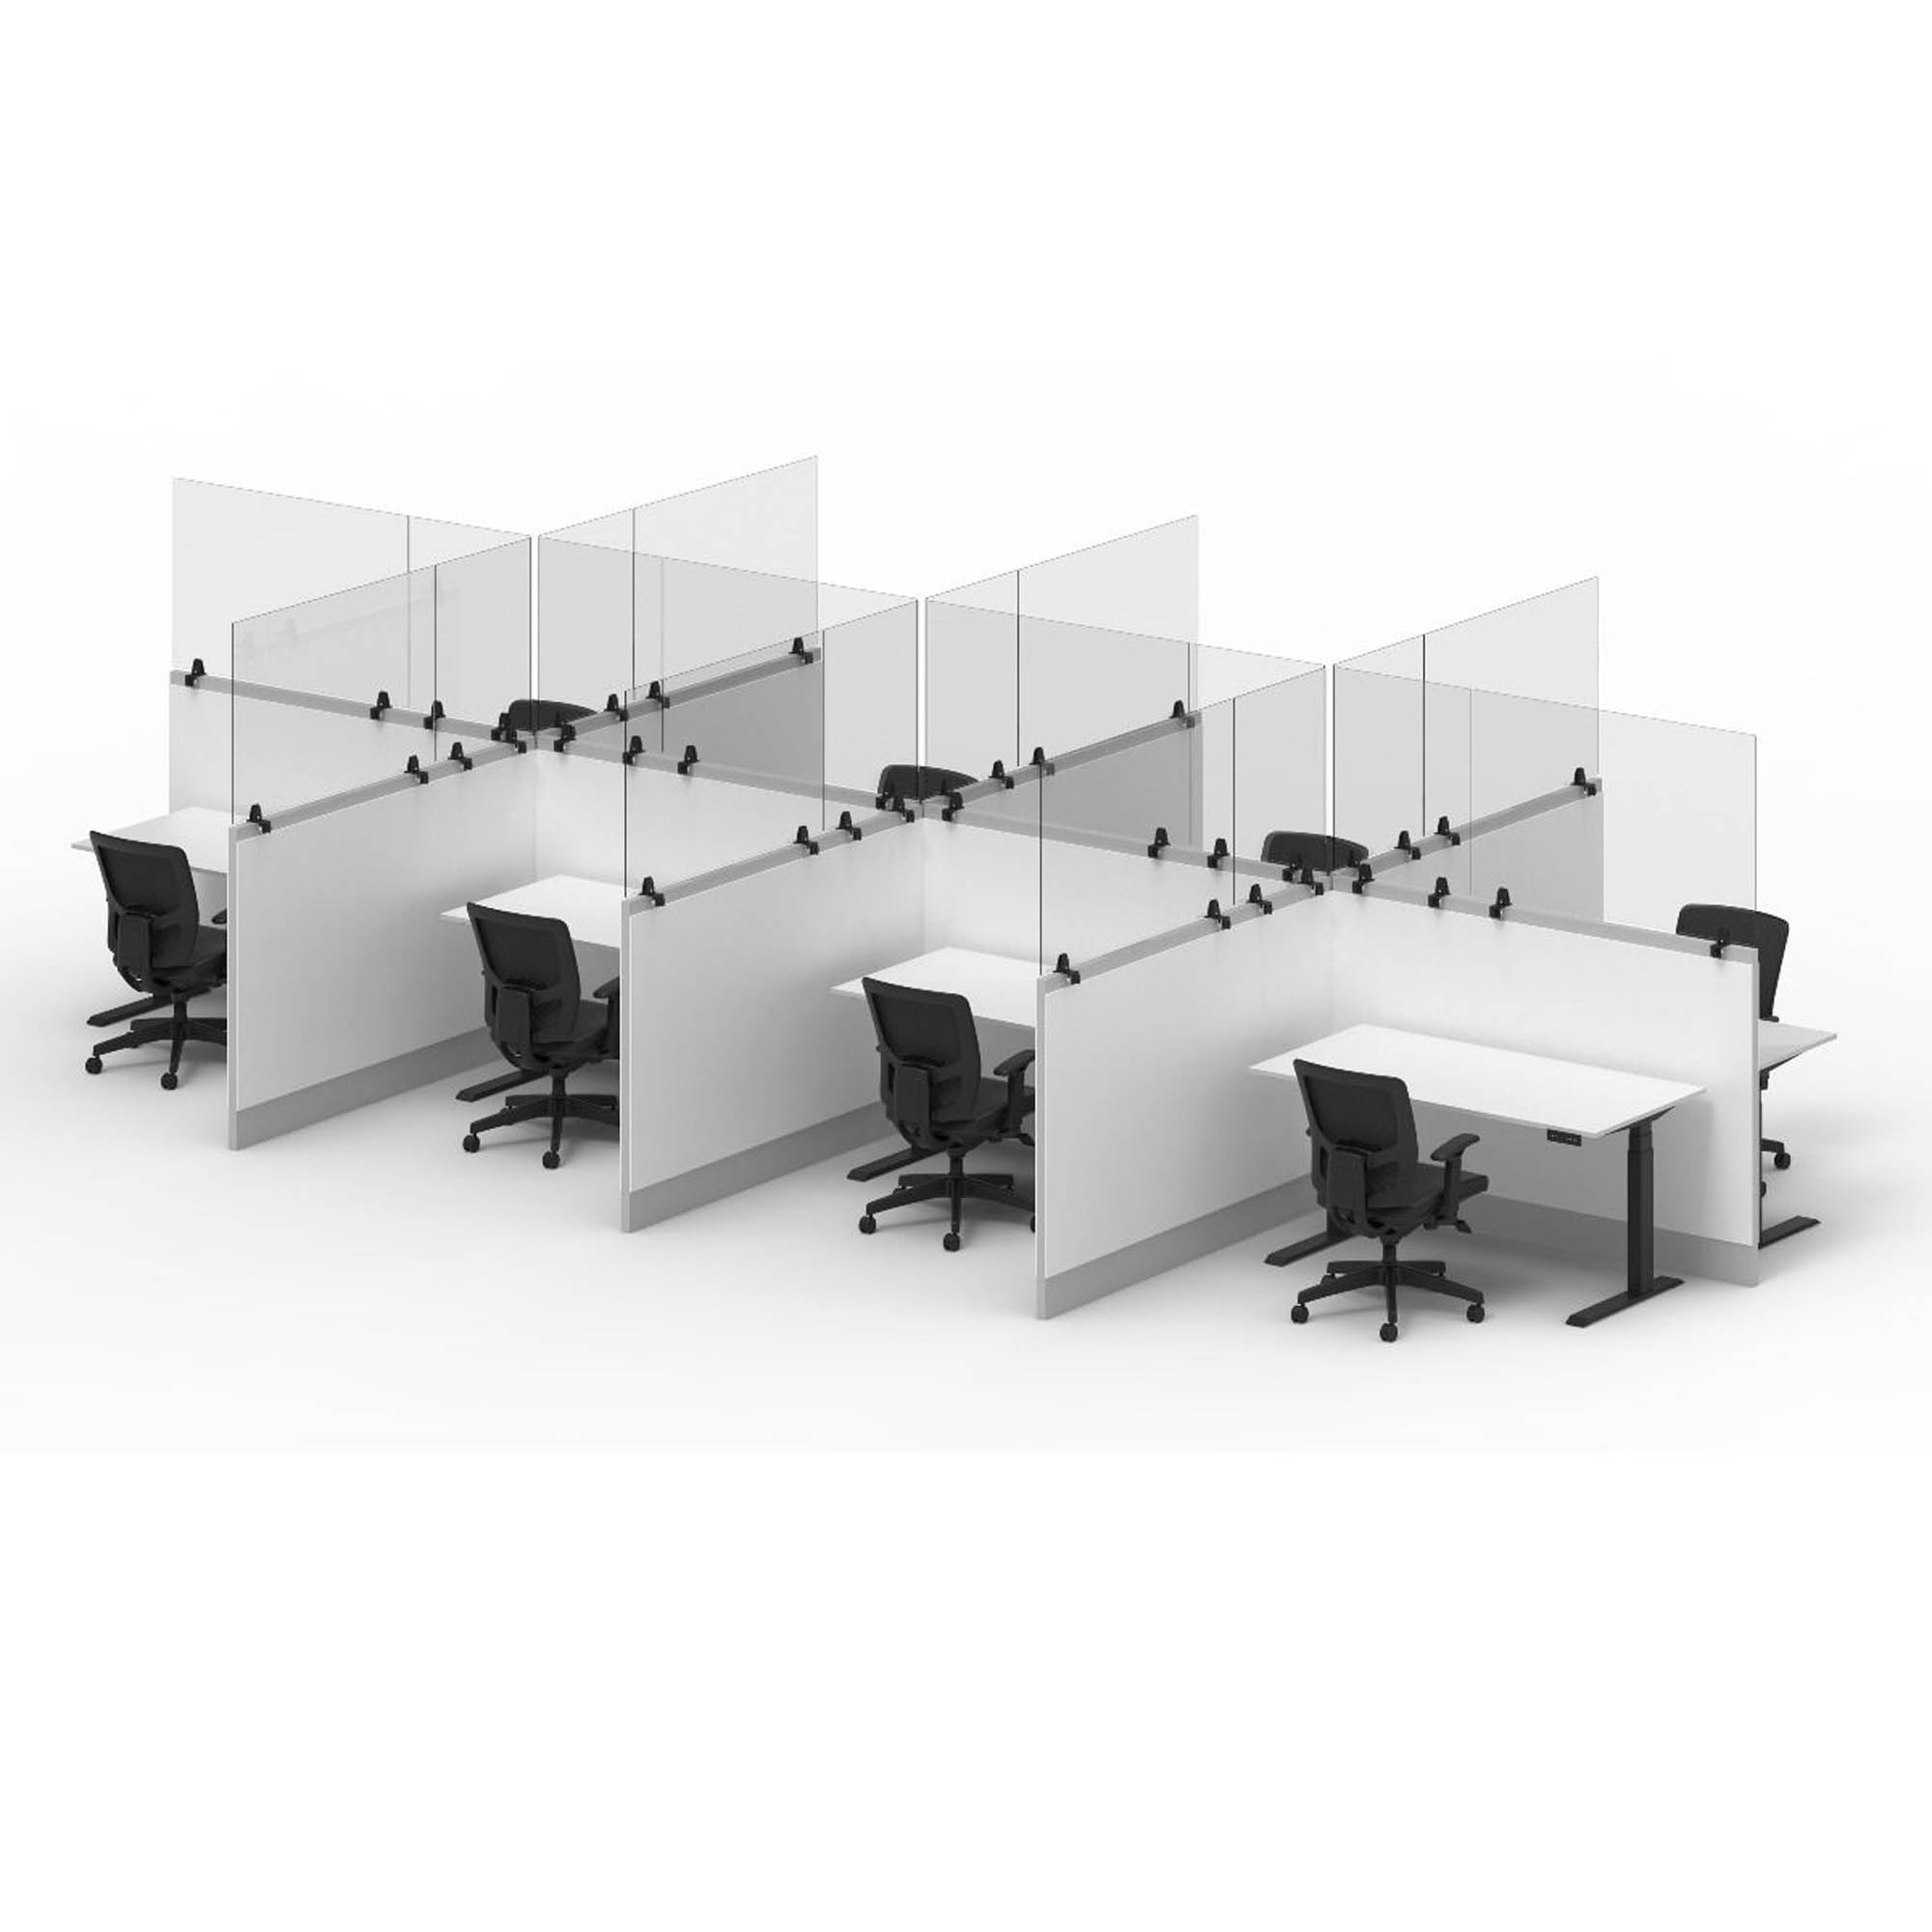 Office Accents Antimicrobial Desktop Panel, Portable Freestanding Protective Acrylic Shield & Sneeze Guard Cubicle Wall Extender - Clamp-On - Clear, 48" x 30" - image 4 of 5